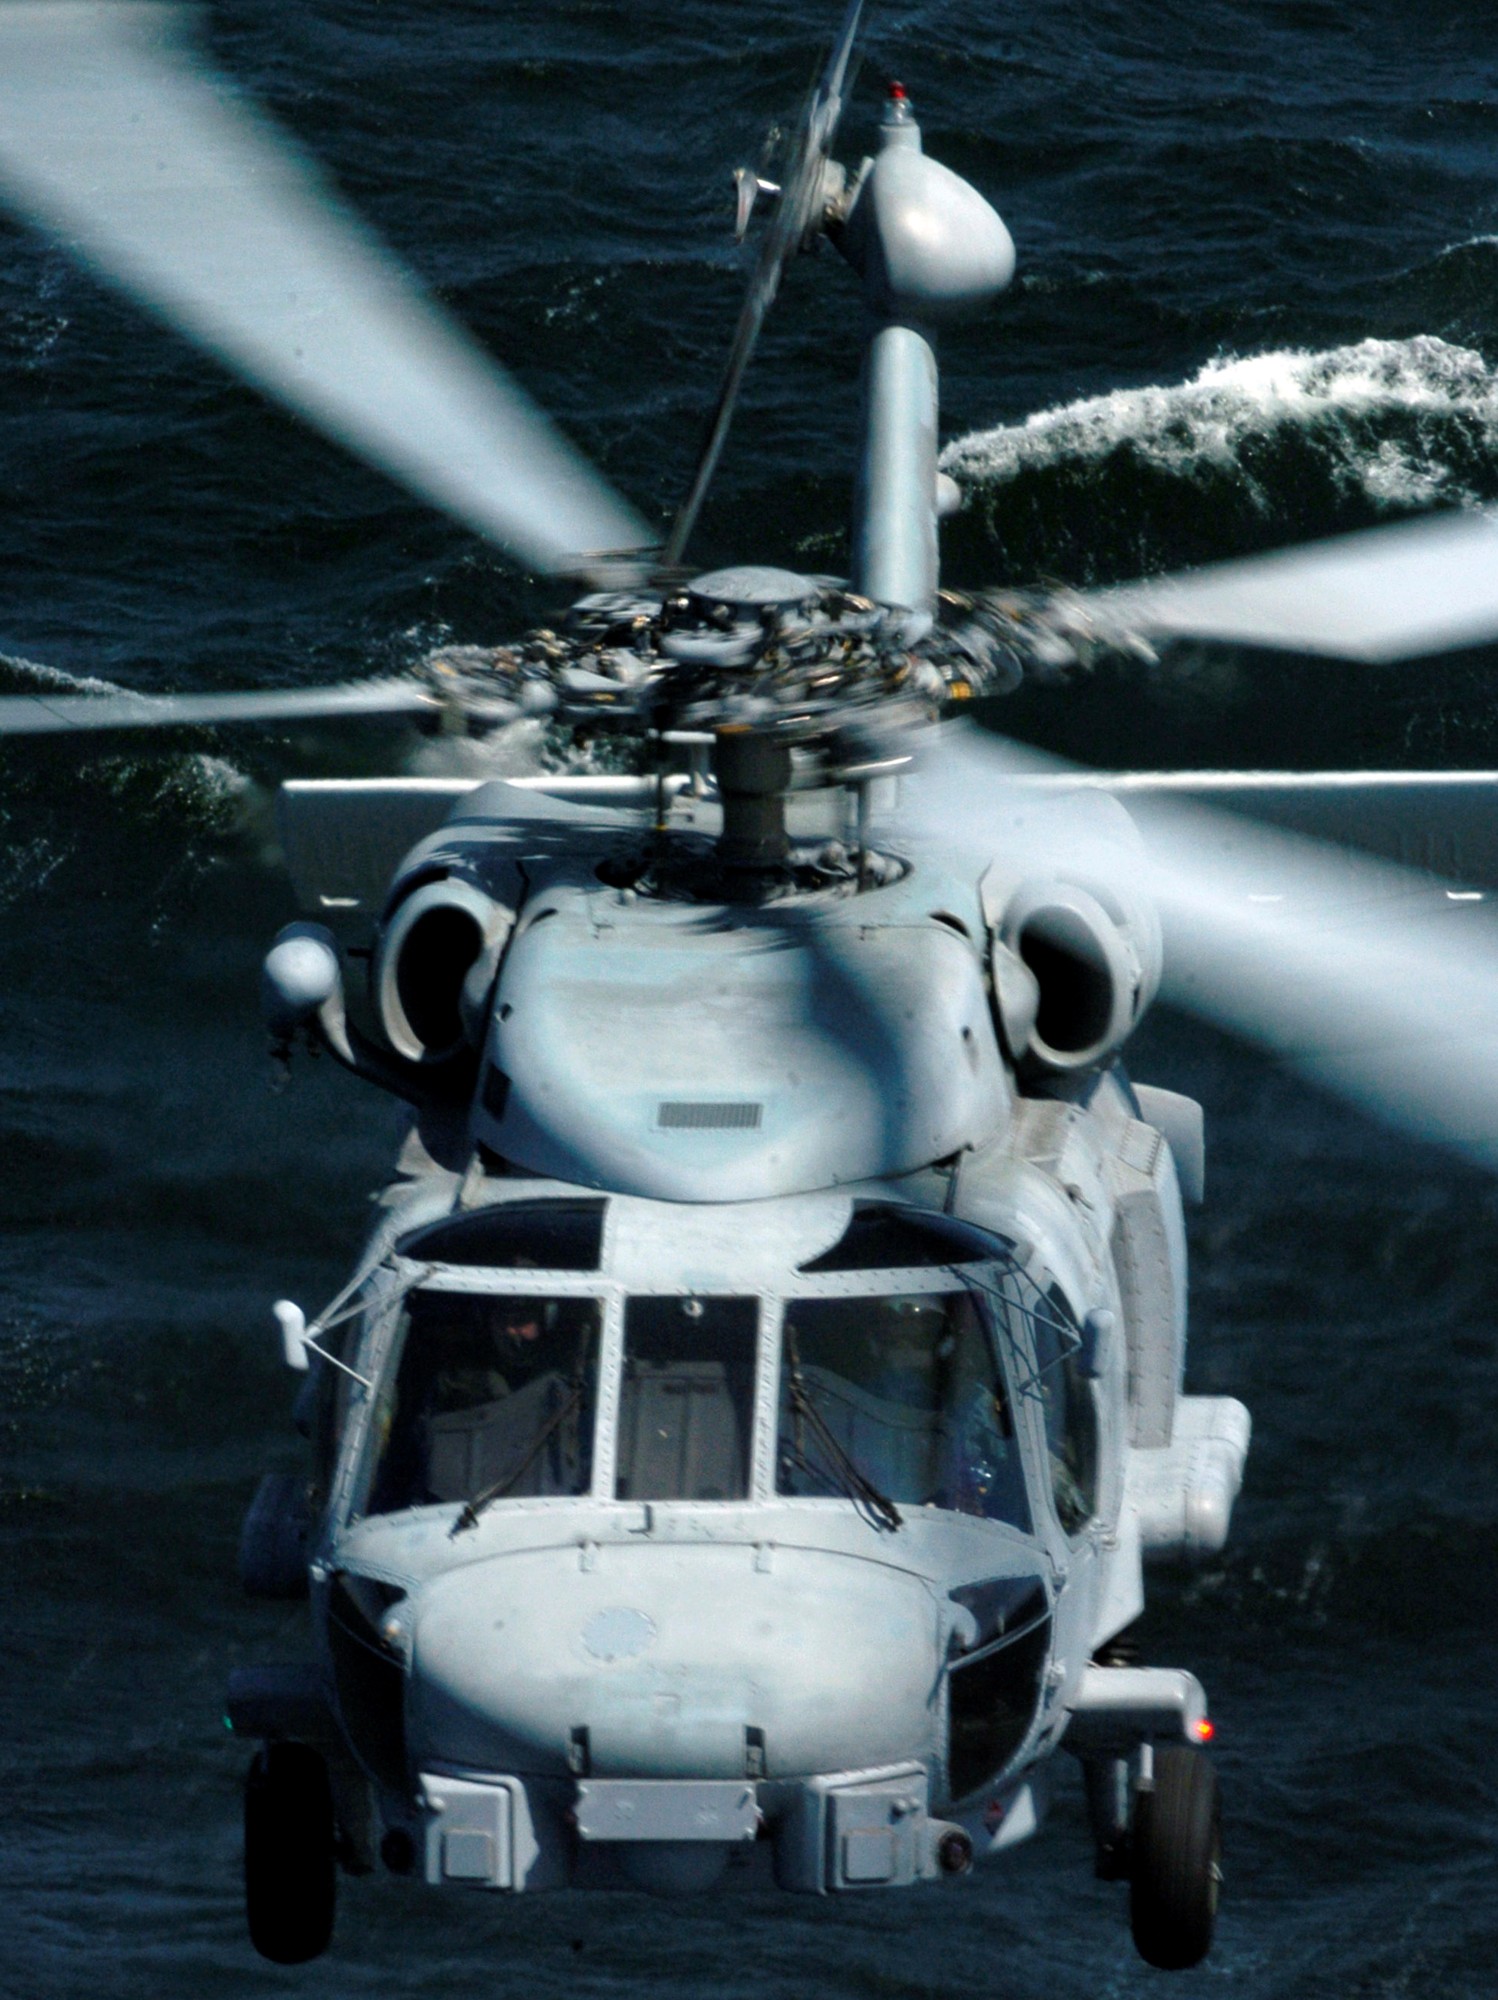 hsm-41 seahawks helicopter maritime strike squadron mh-60r fleet replacement navy 2006 11